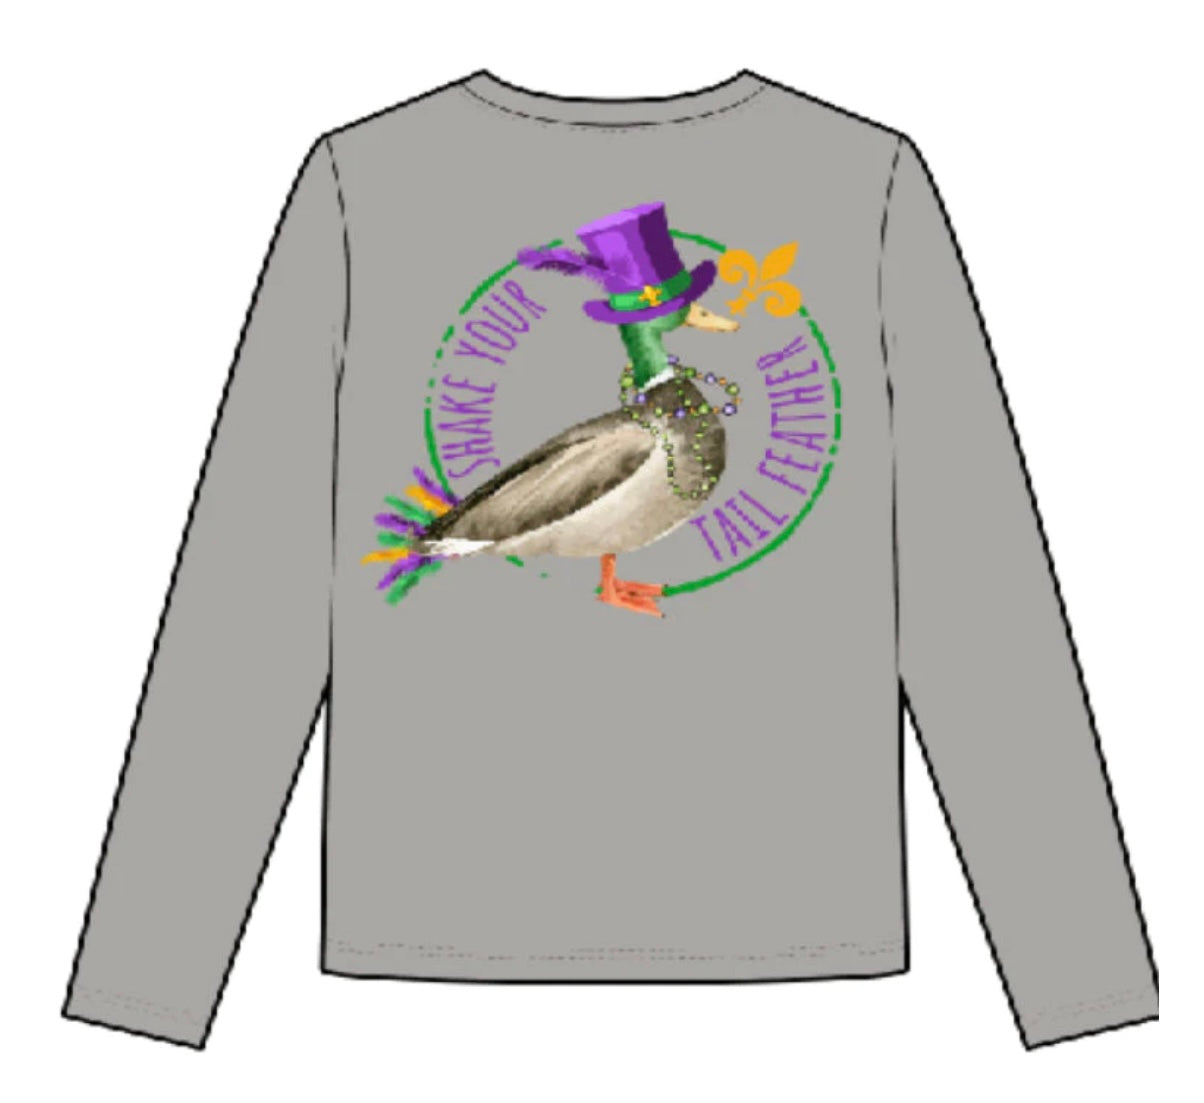 Shake Your Tail with this Belle Cher Modal Kid Shirt, featuring a duck in a hat on a long sleeve t-shirt made from breathable modal fabric.